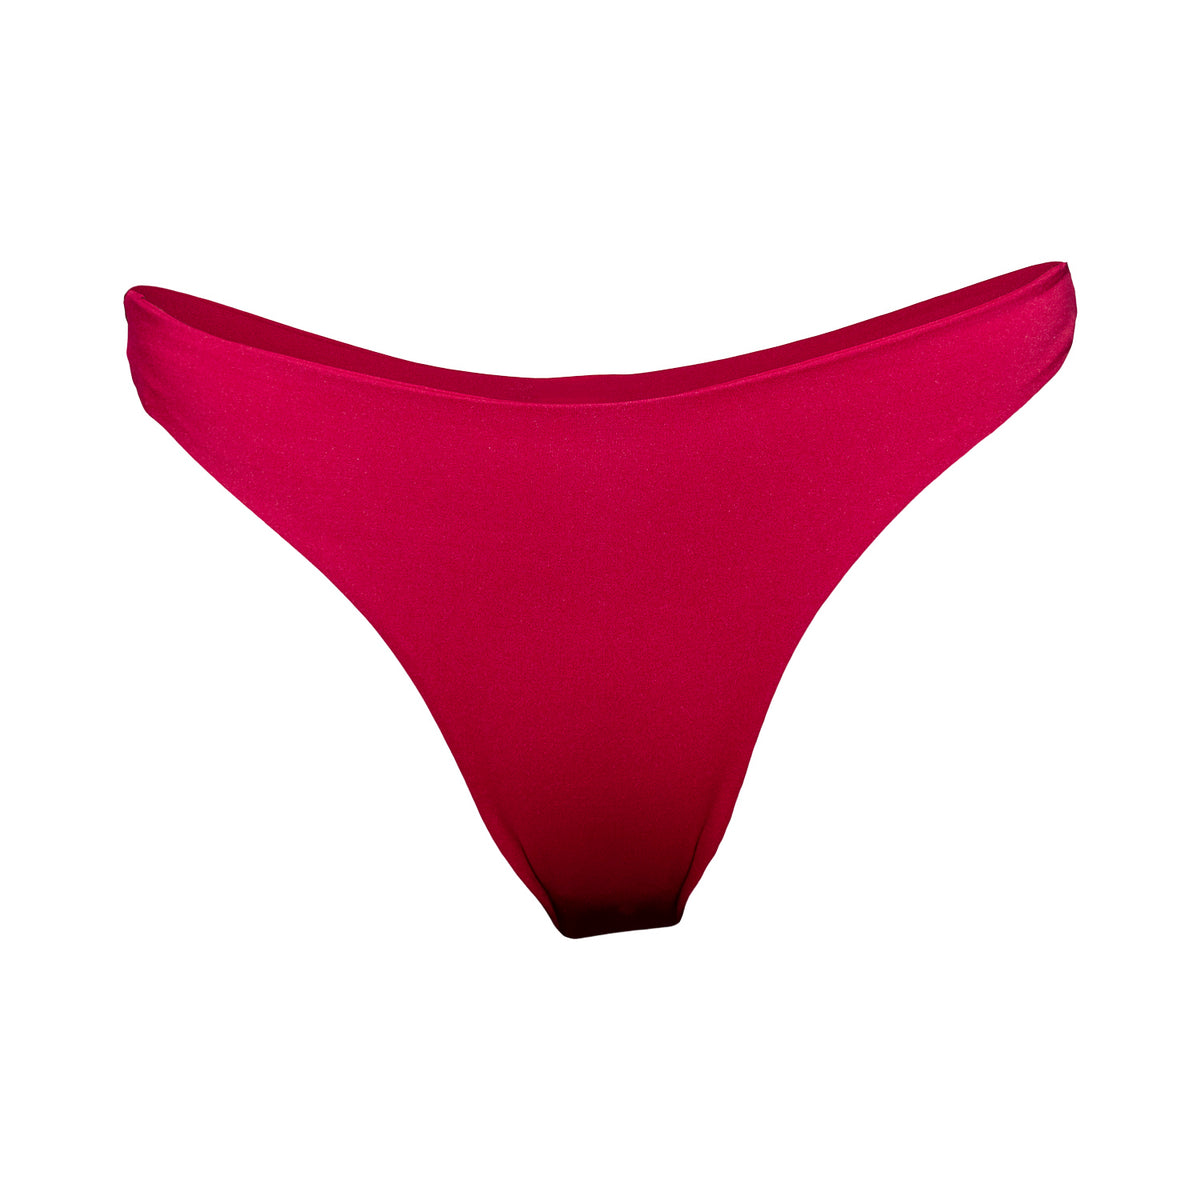 Tanga bikini bottoms with an extra soft touch, fine lining and thick feel. Made sustainably and ethically in Europe from finest polyamide. Perfected fit for every body shape.